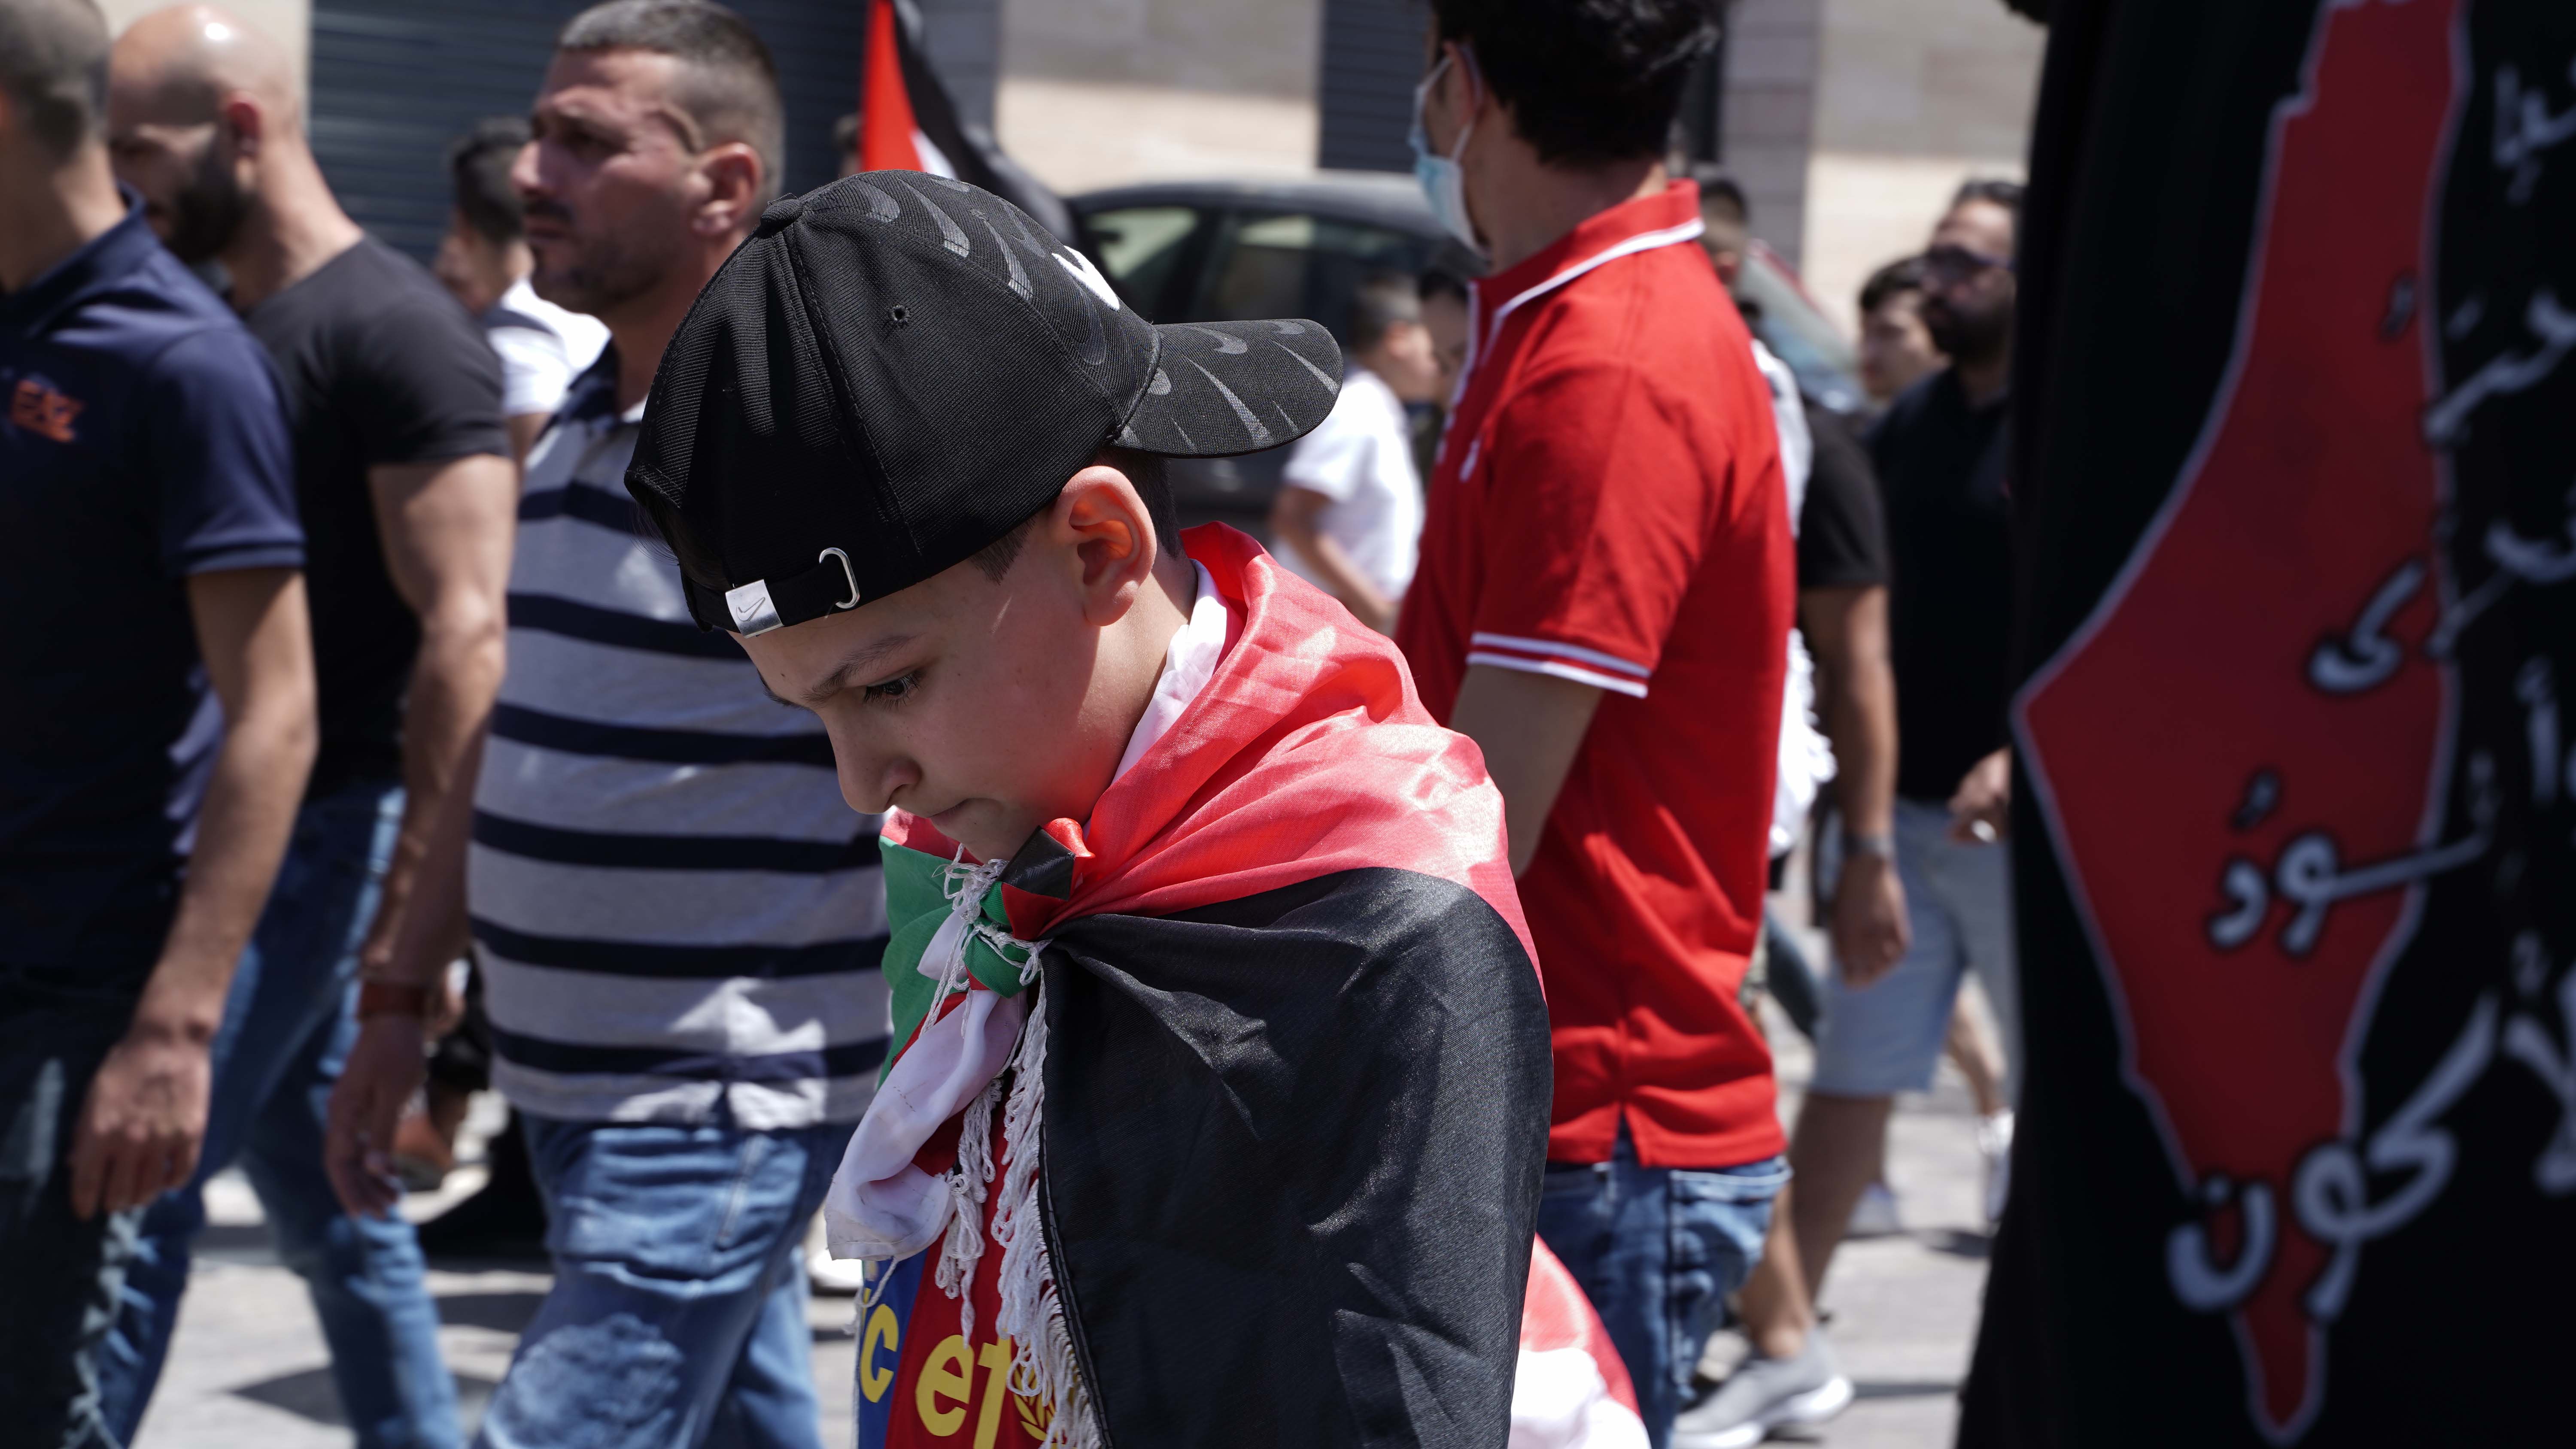 A young boy looks down during a protest in Bethlehem (MEE/Akram al-Waara)